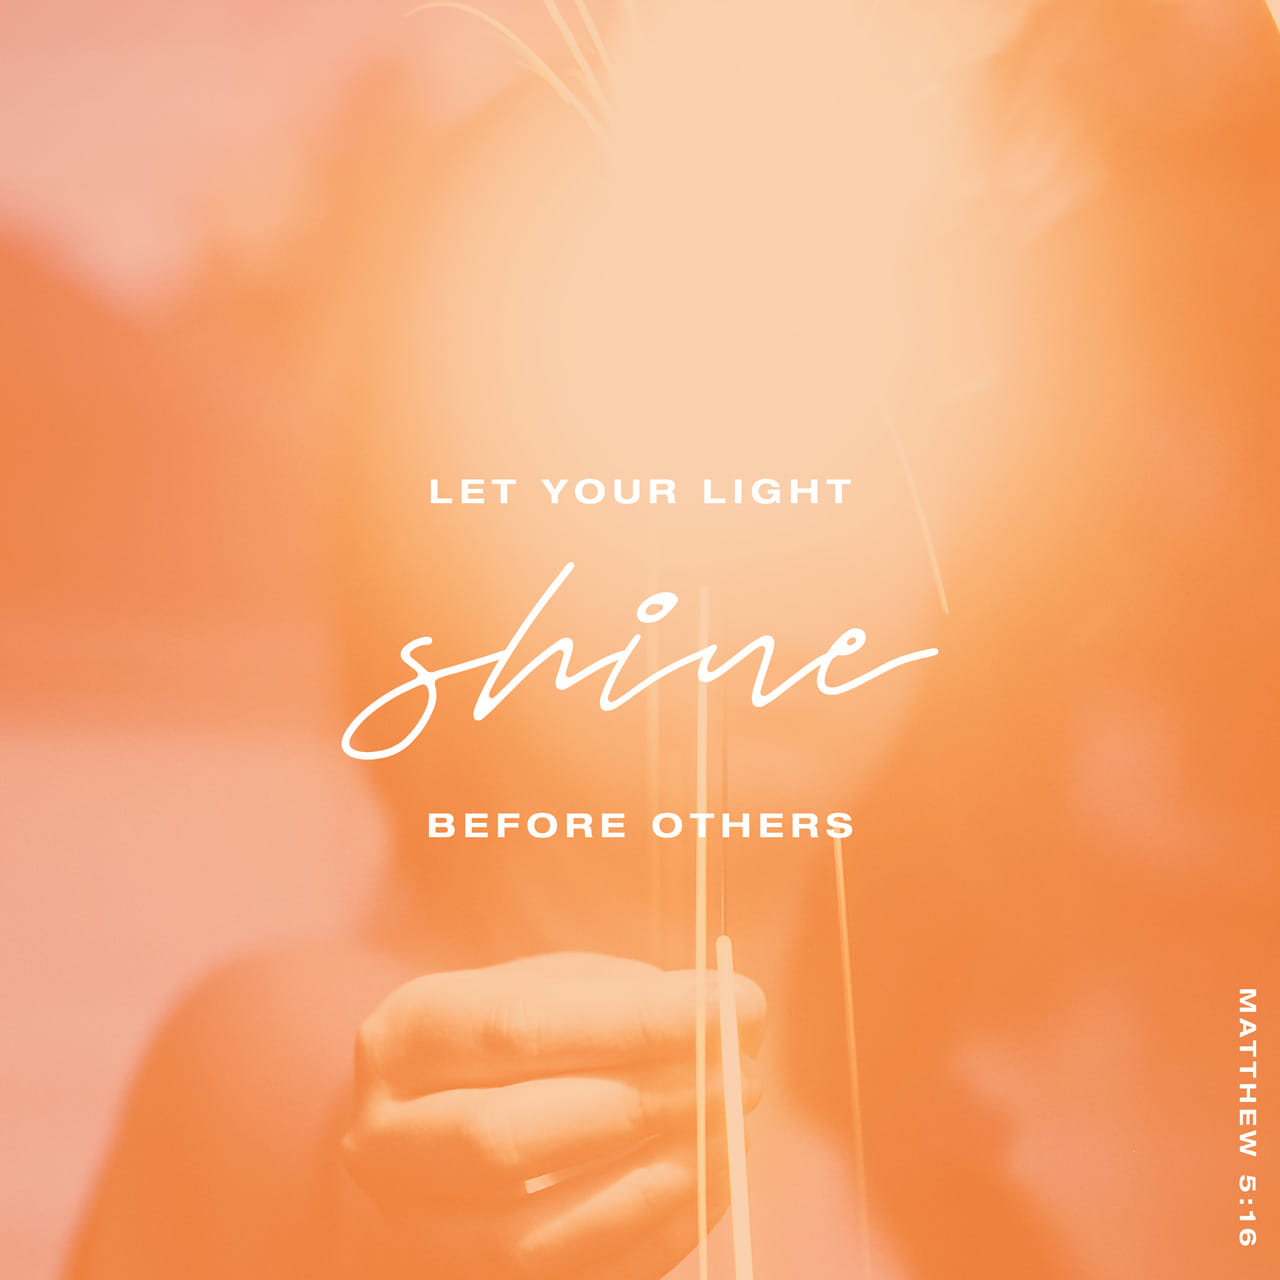 Let your light shine ... image from life.church